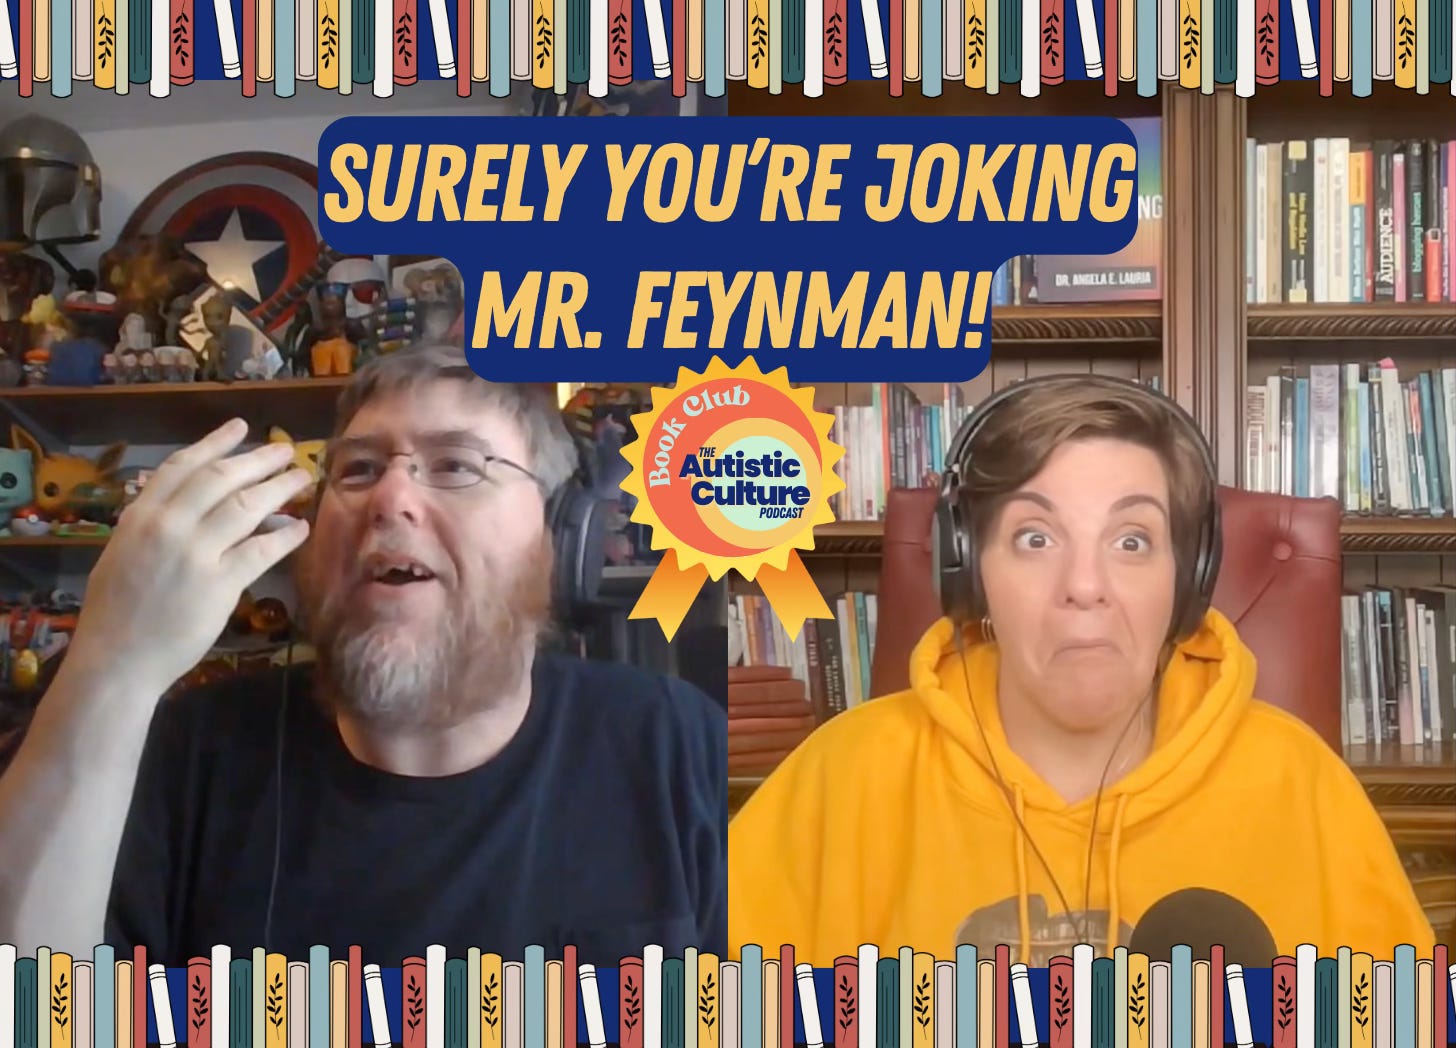 autistic podcast hosts discuss the book "Surely You're Joking Mr. Feynman"